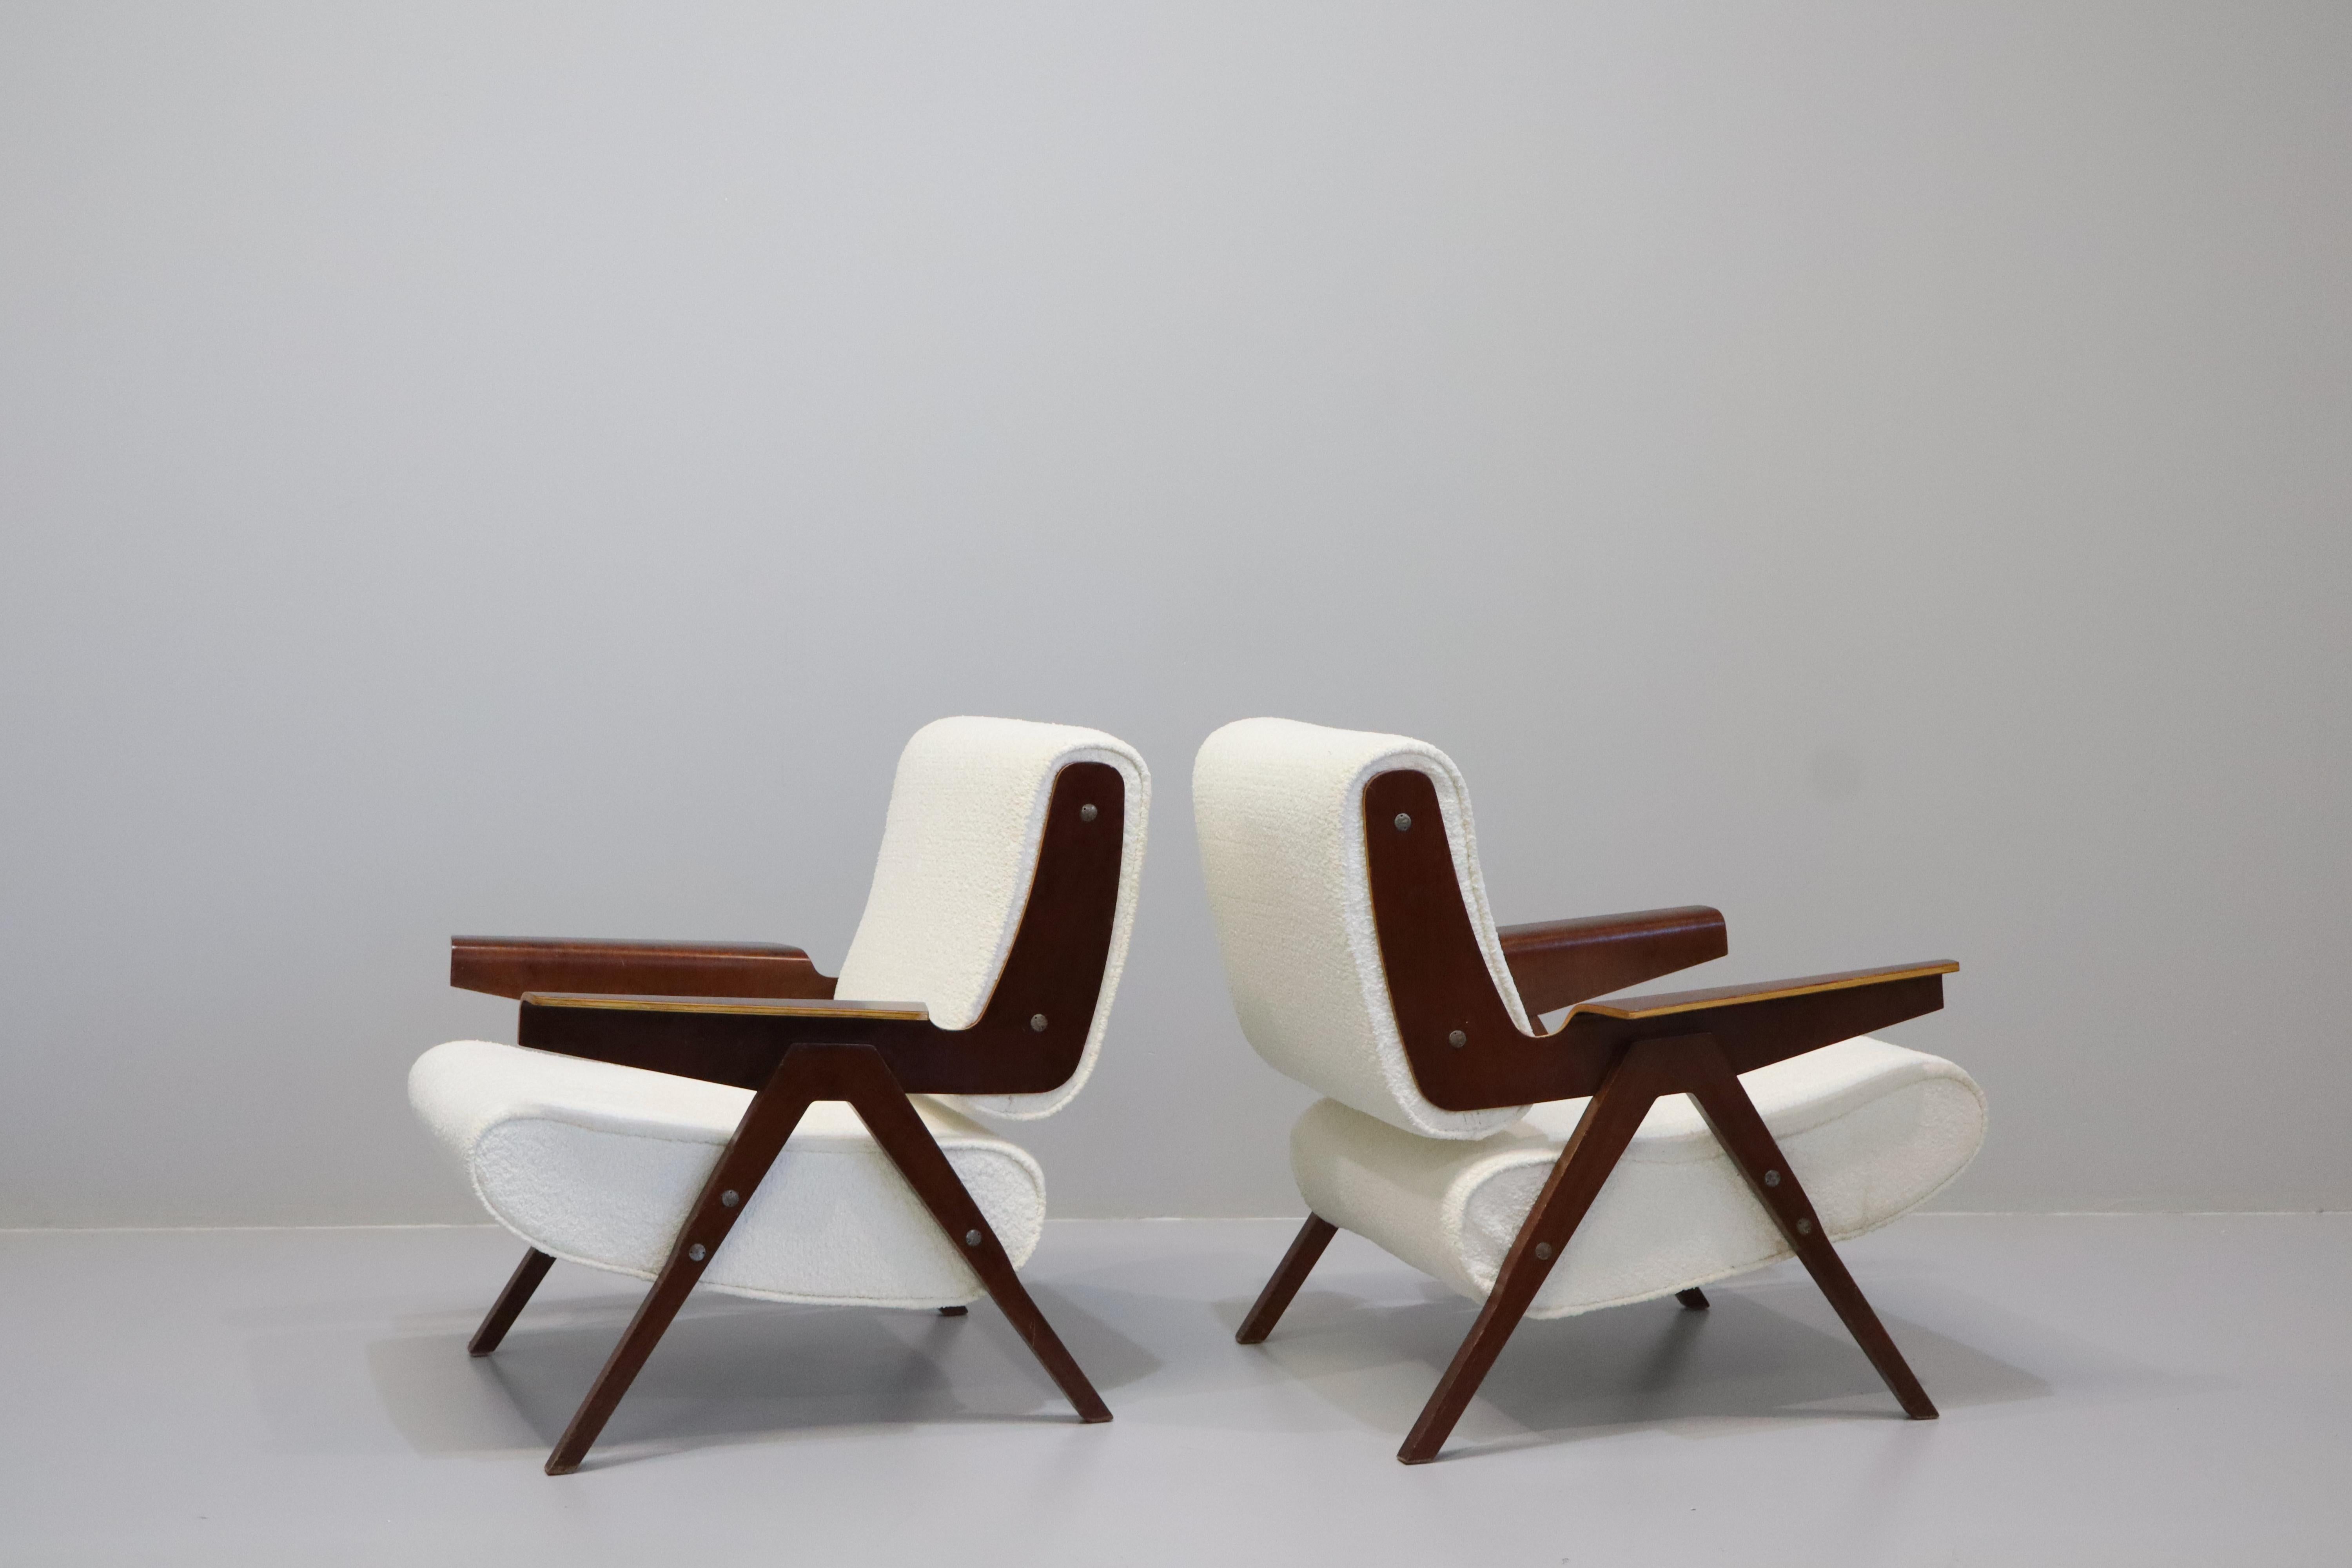 Pair Of Gianfranco Frattini Model 831 Lounge Chairs For Cassina, 1950s For Sale 3